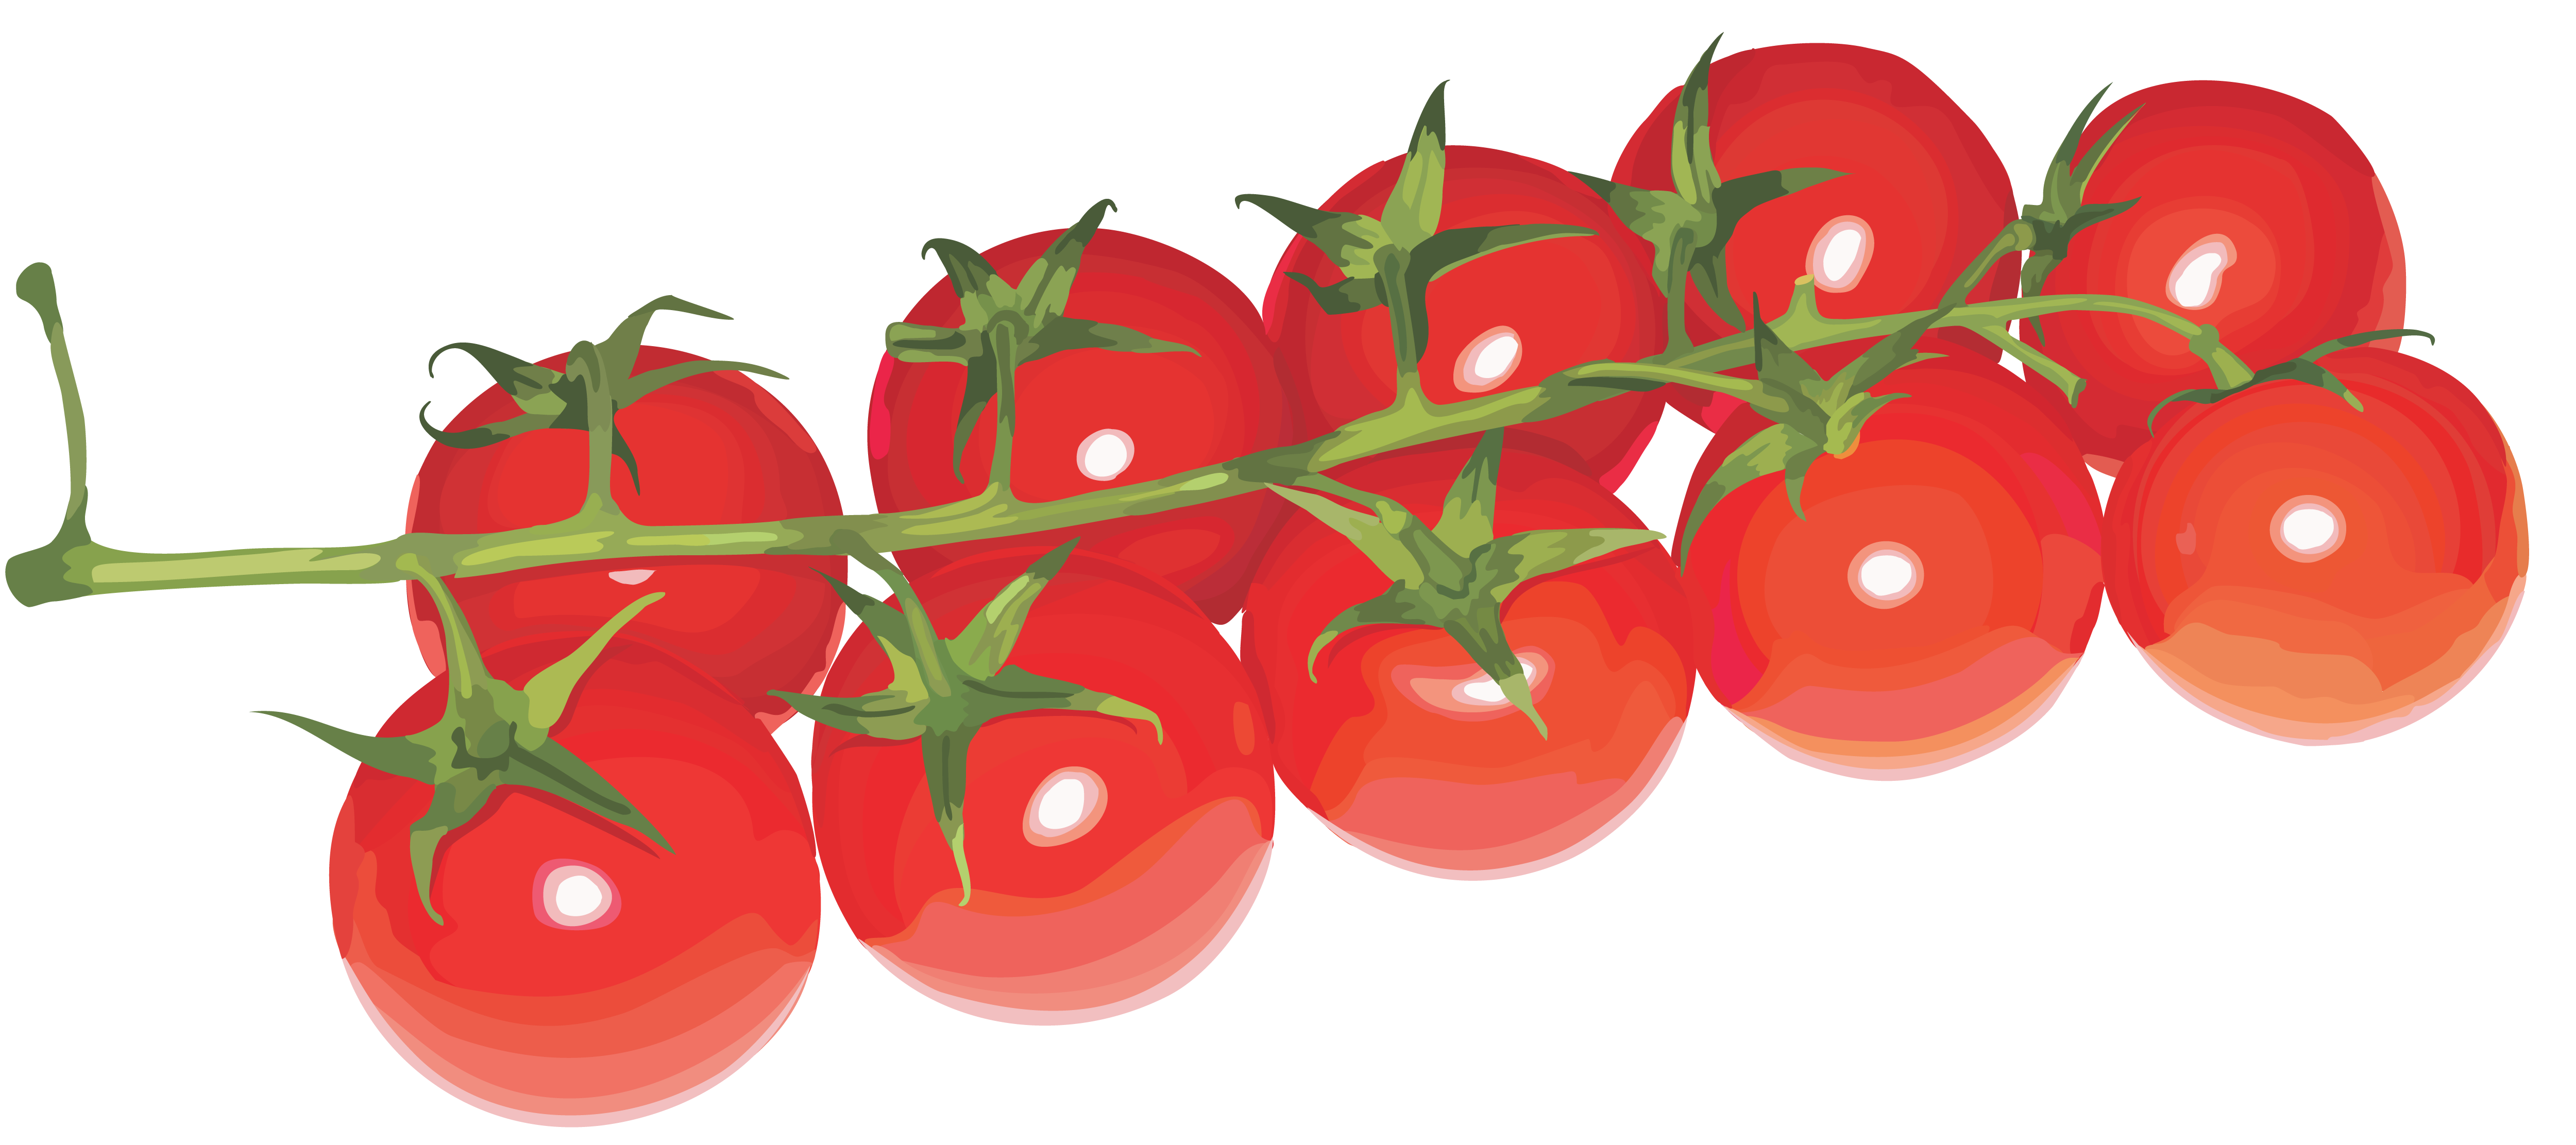 Tomatoes, Wallpaper For Your Desktop, Nk/62 - Cherry Tomato Transparent - HD Wallpaper 